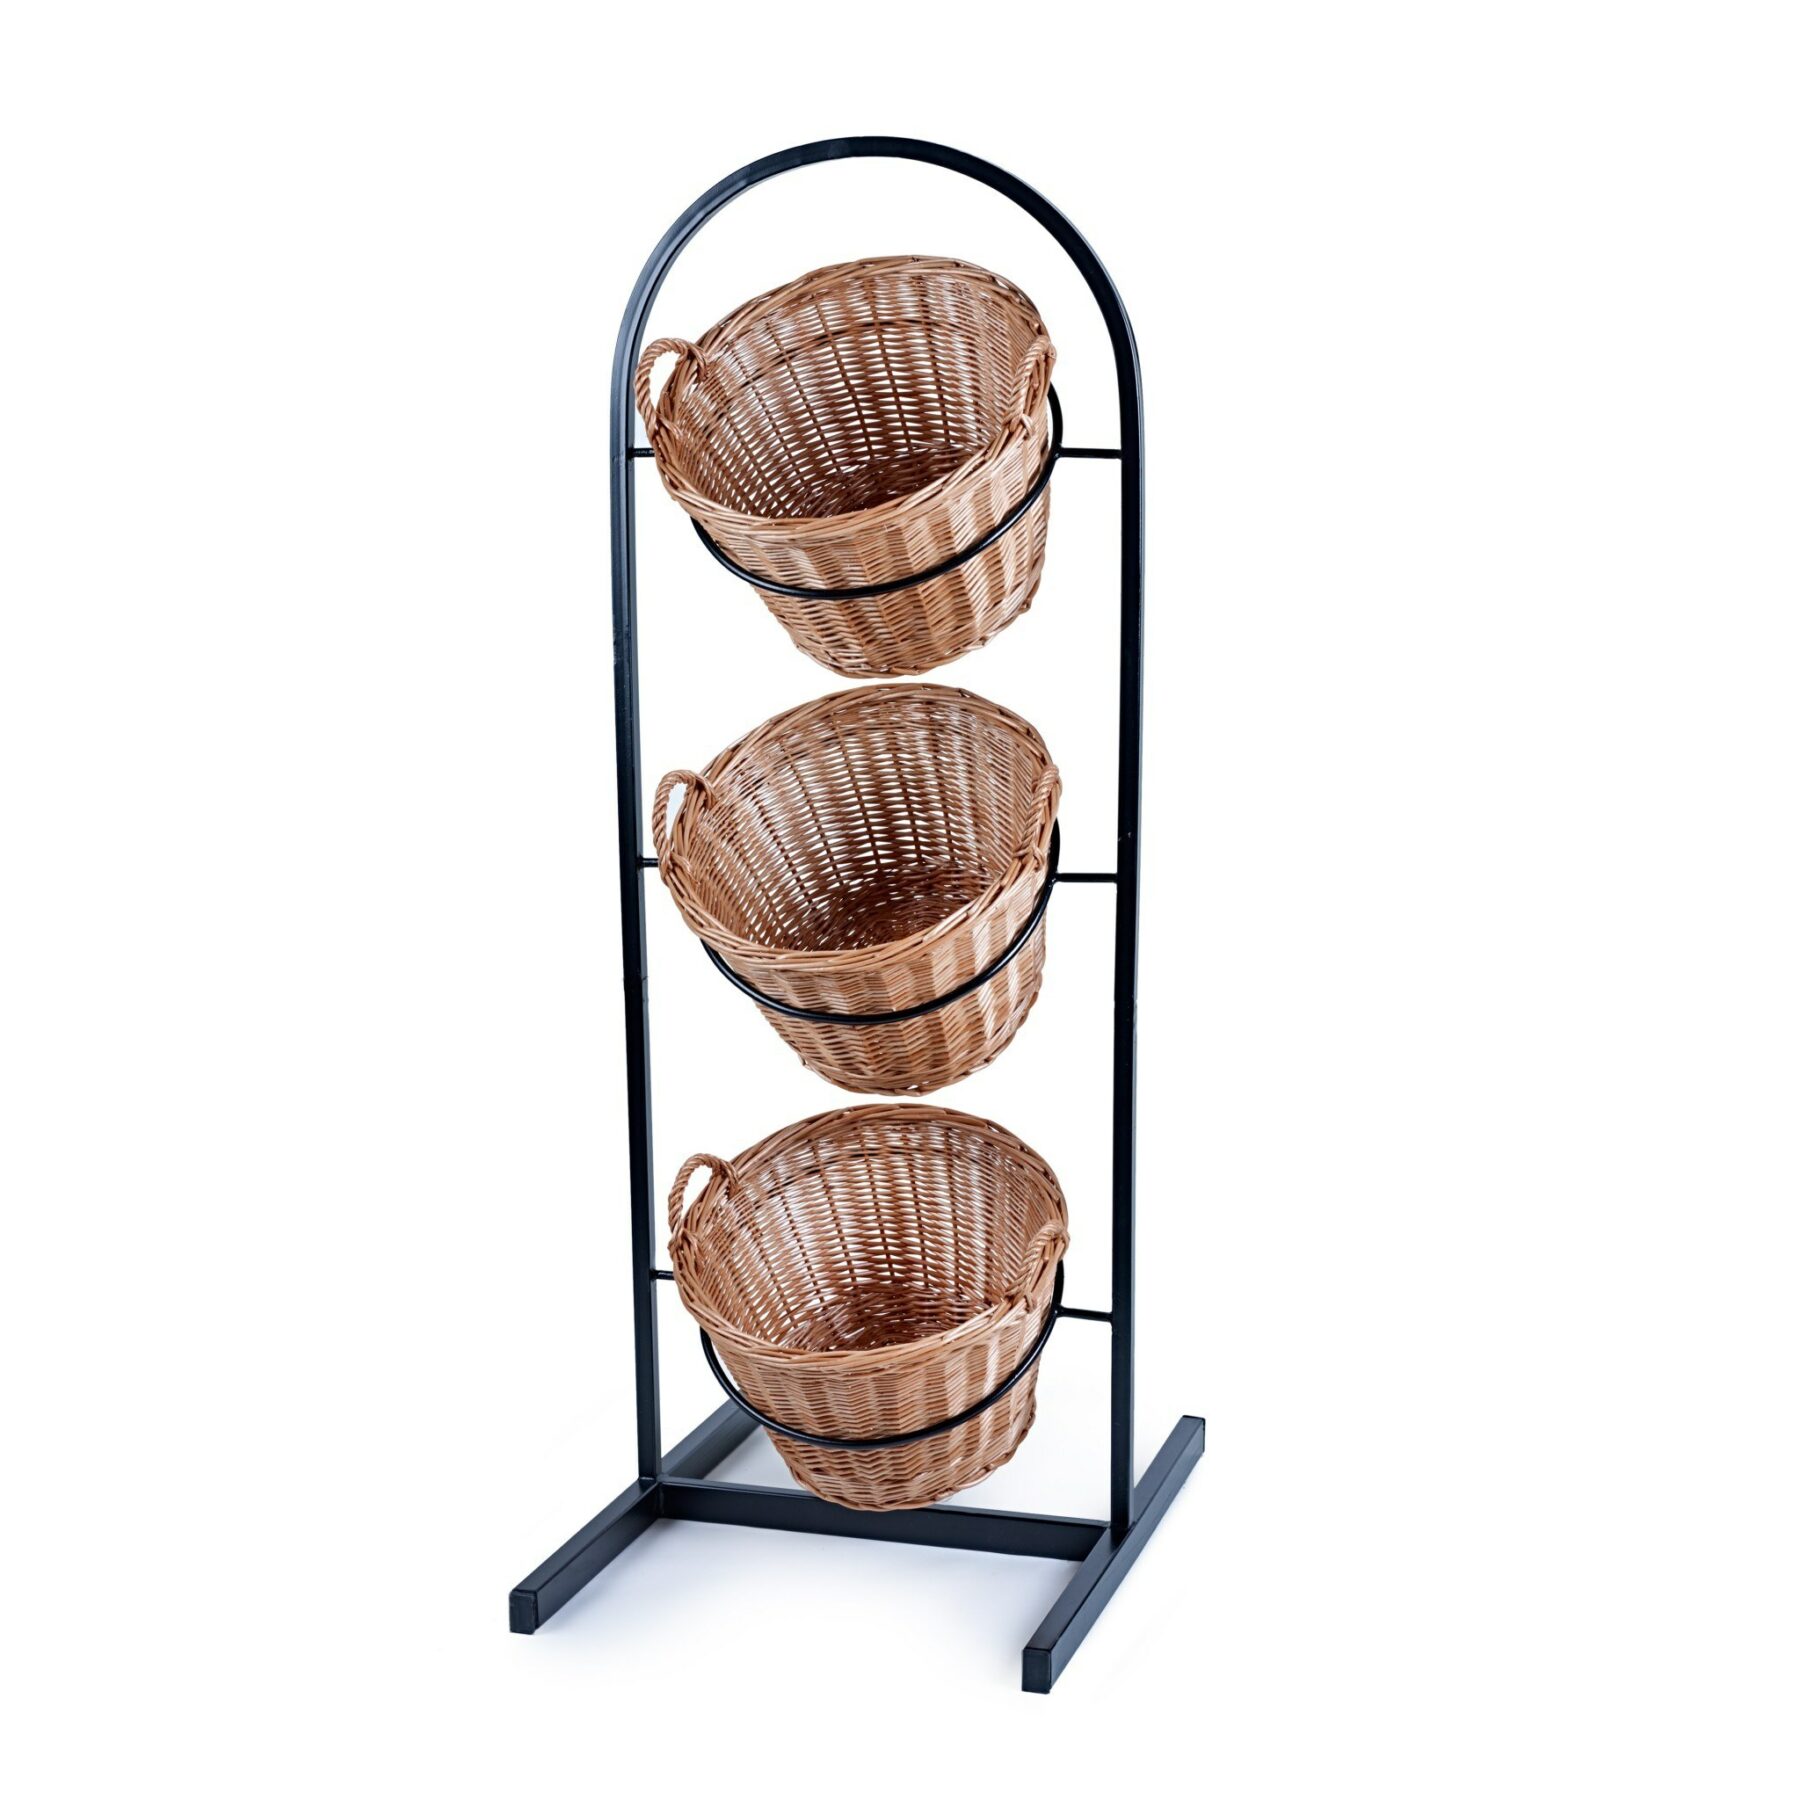 3 Tier Wire Display Stand with Baskets